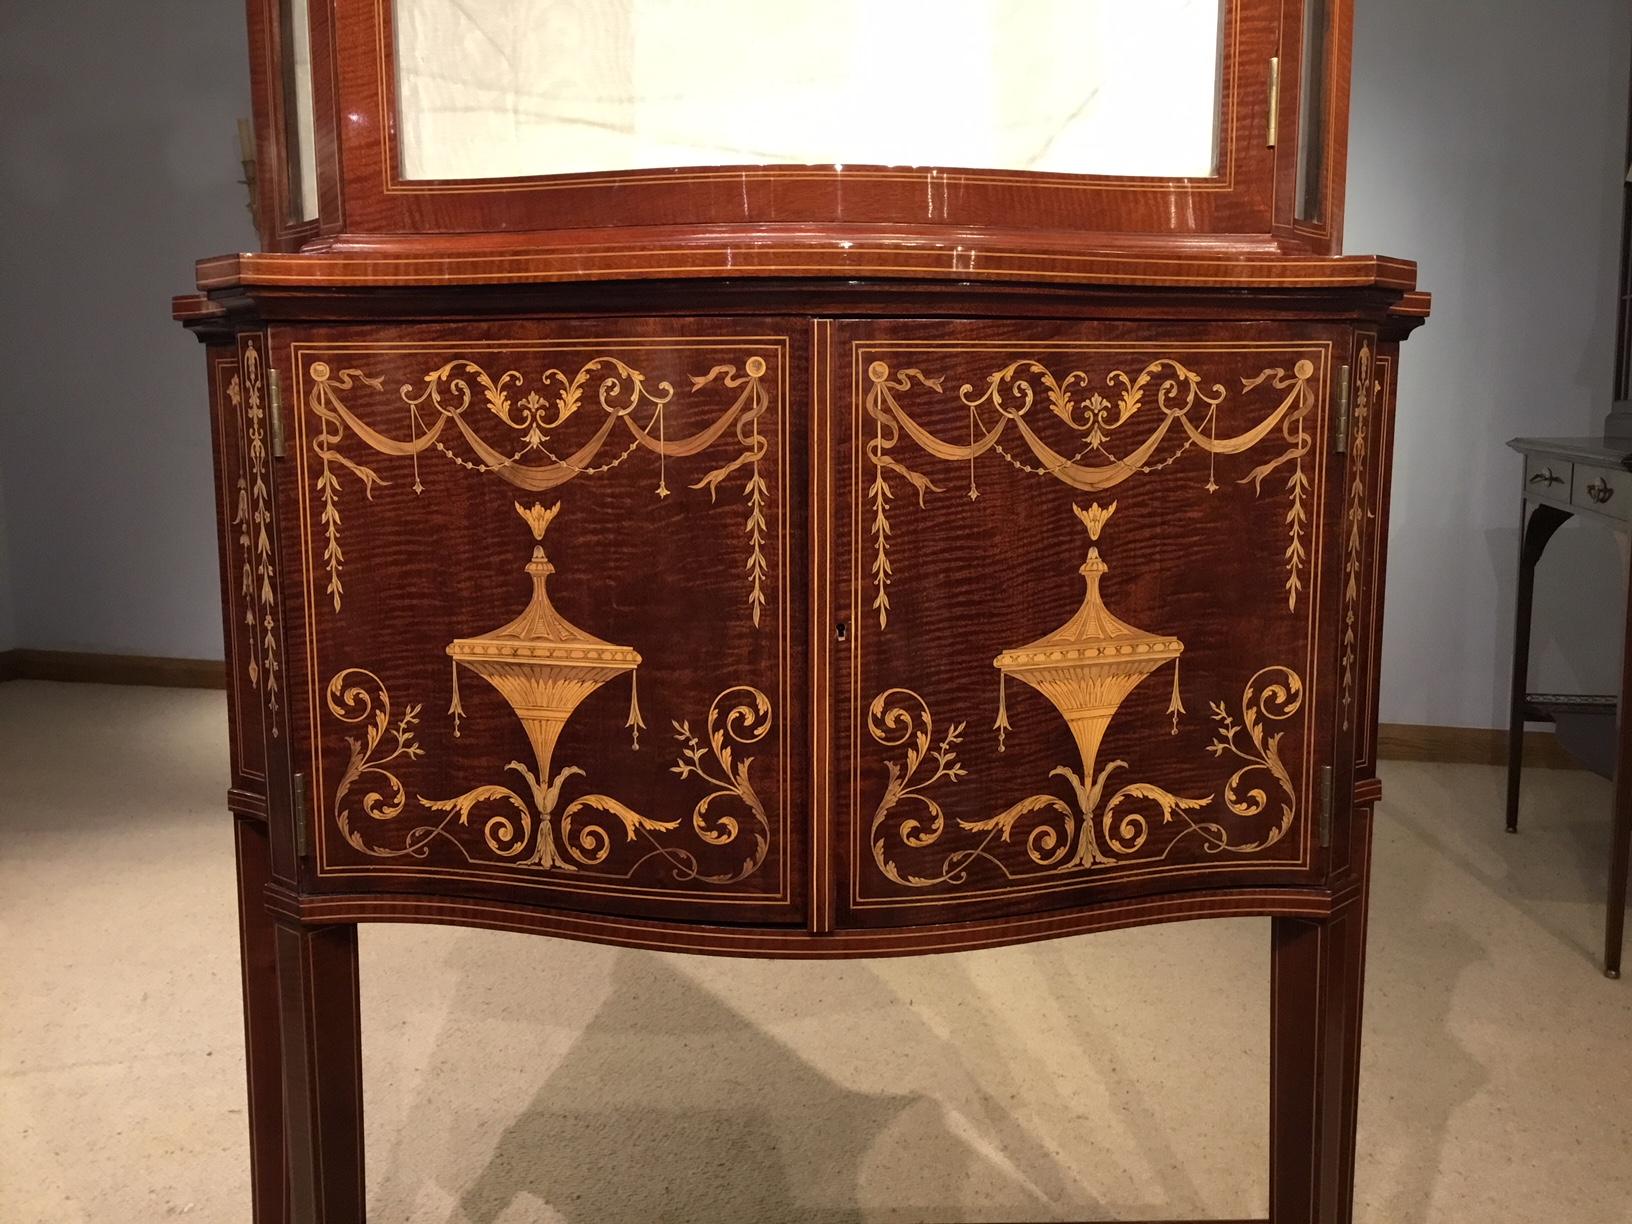  Marquetry Inlaid Edwardian Period Serpentine Cabinet by Maple 7